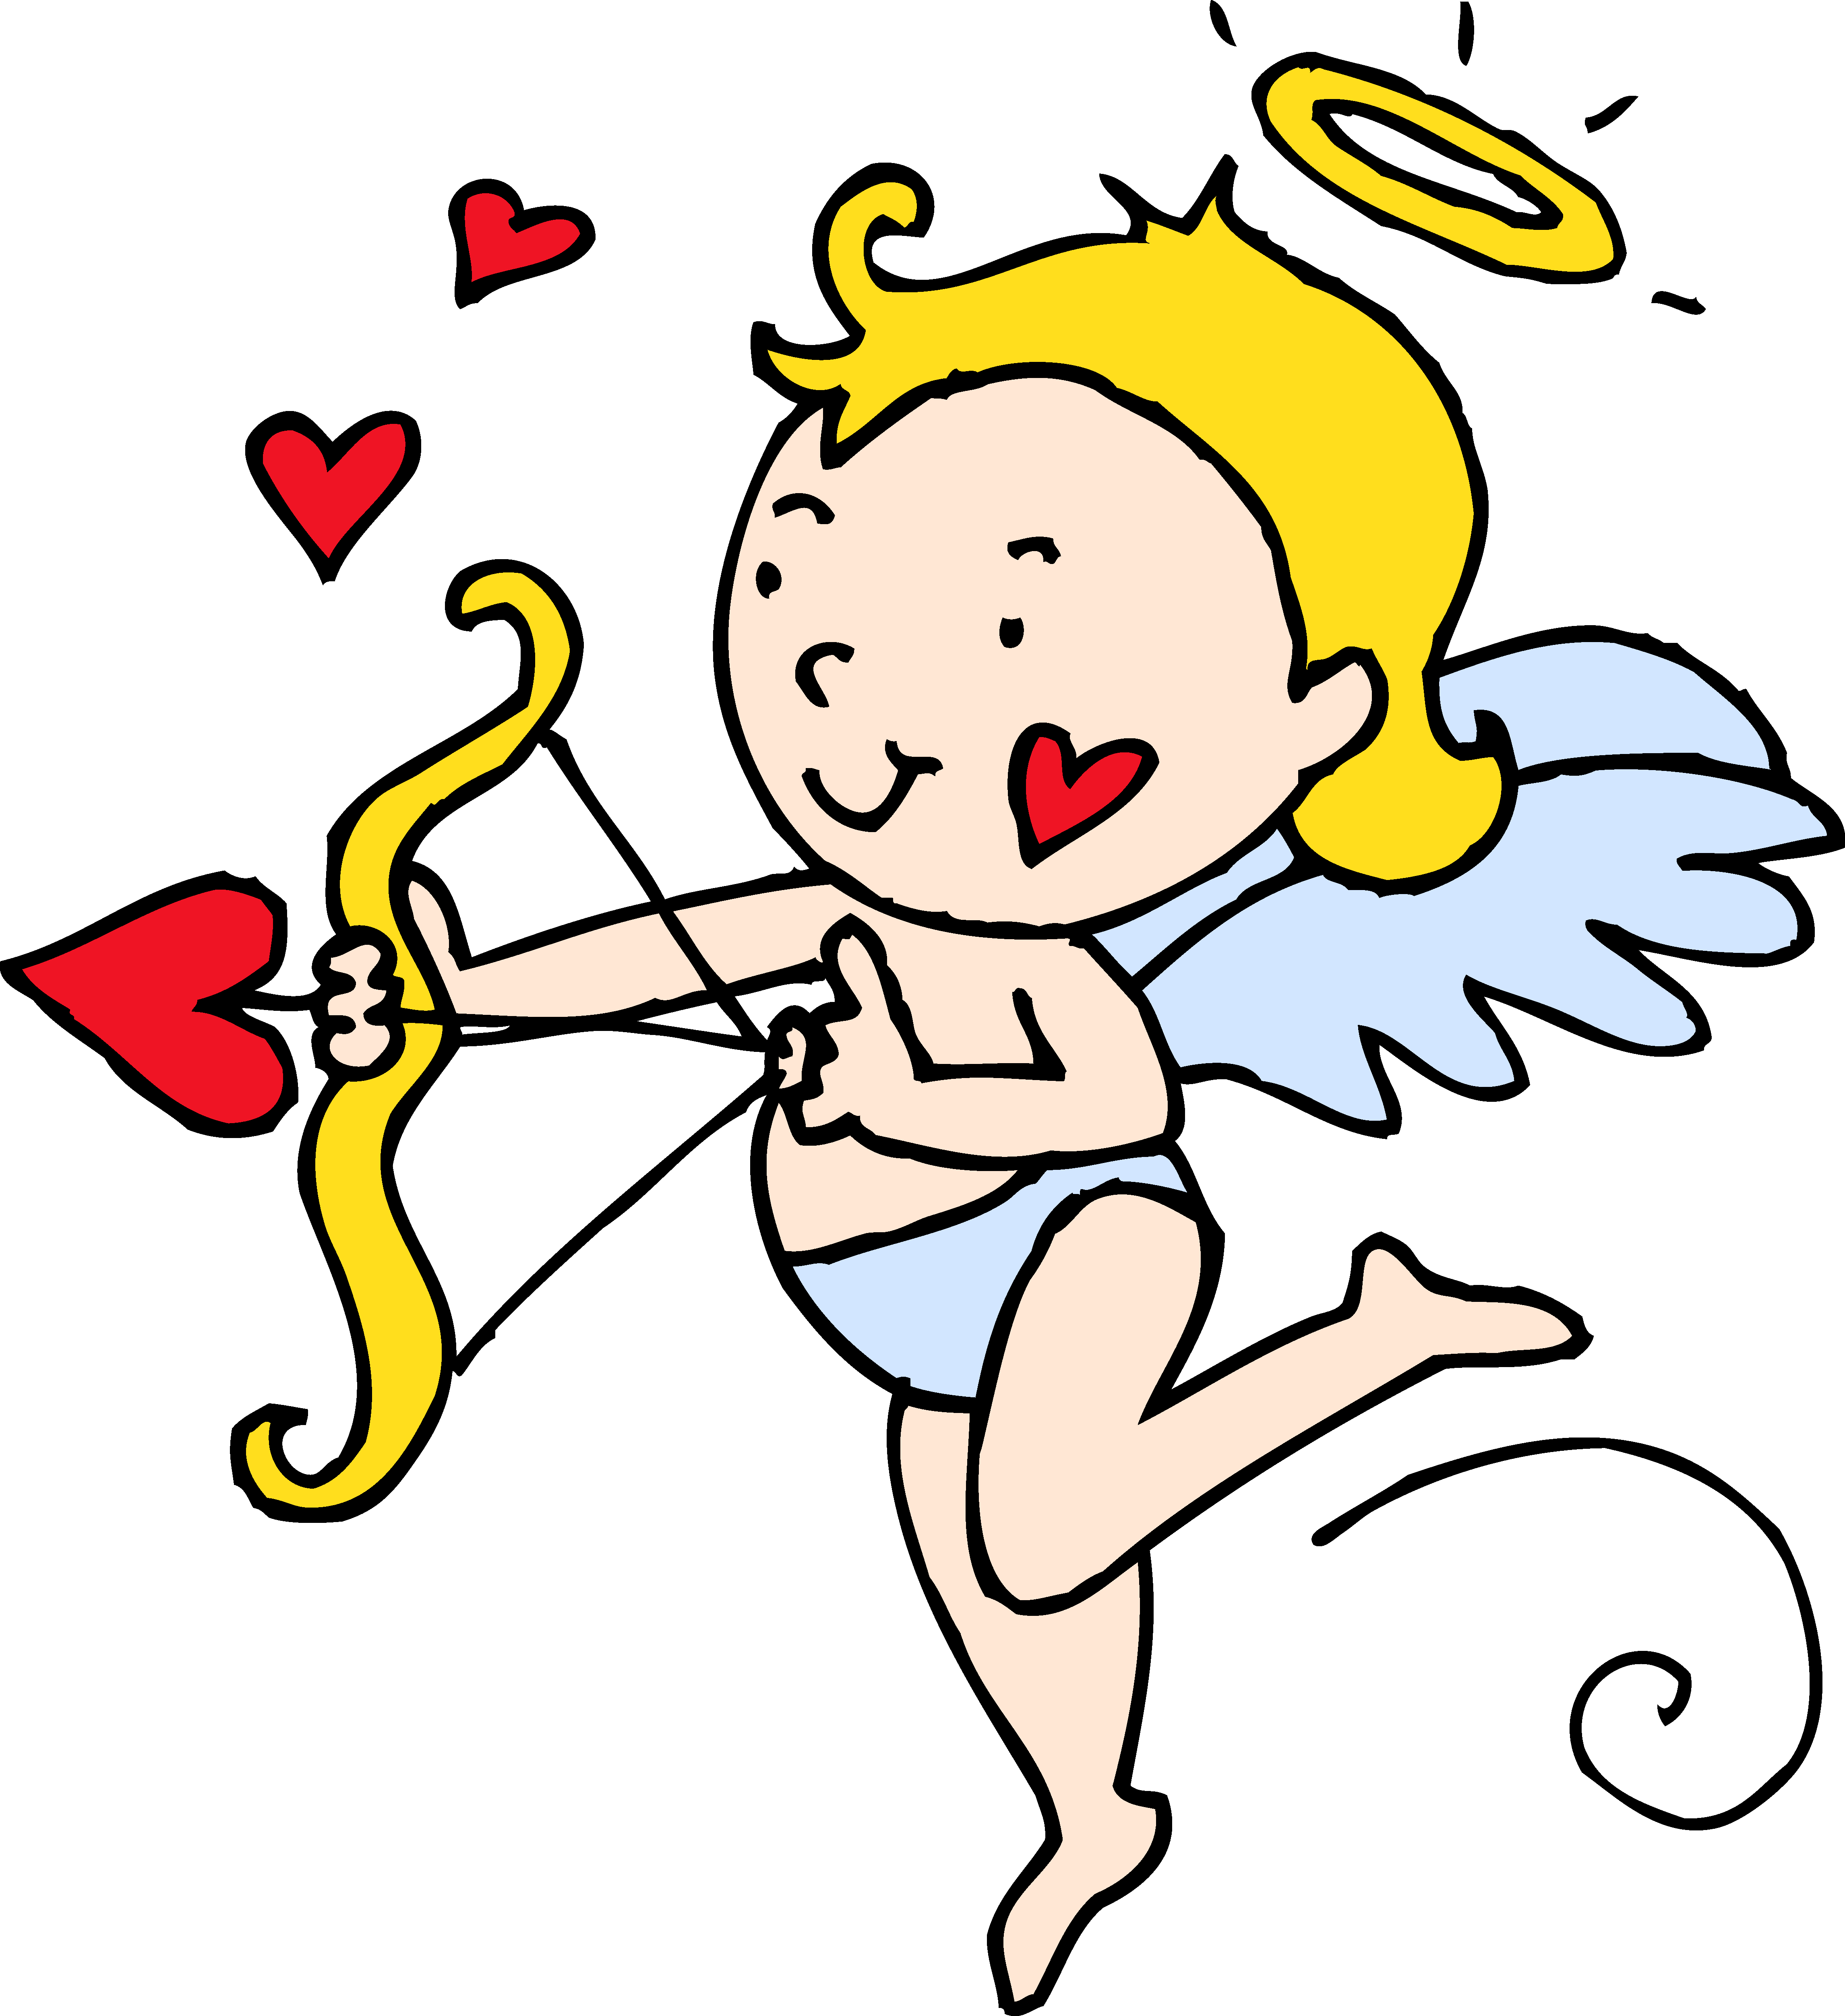 Valentines cupid free clip. Holidays clipart cute